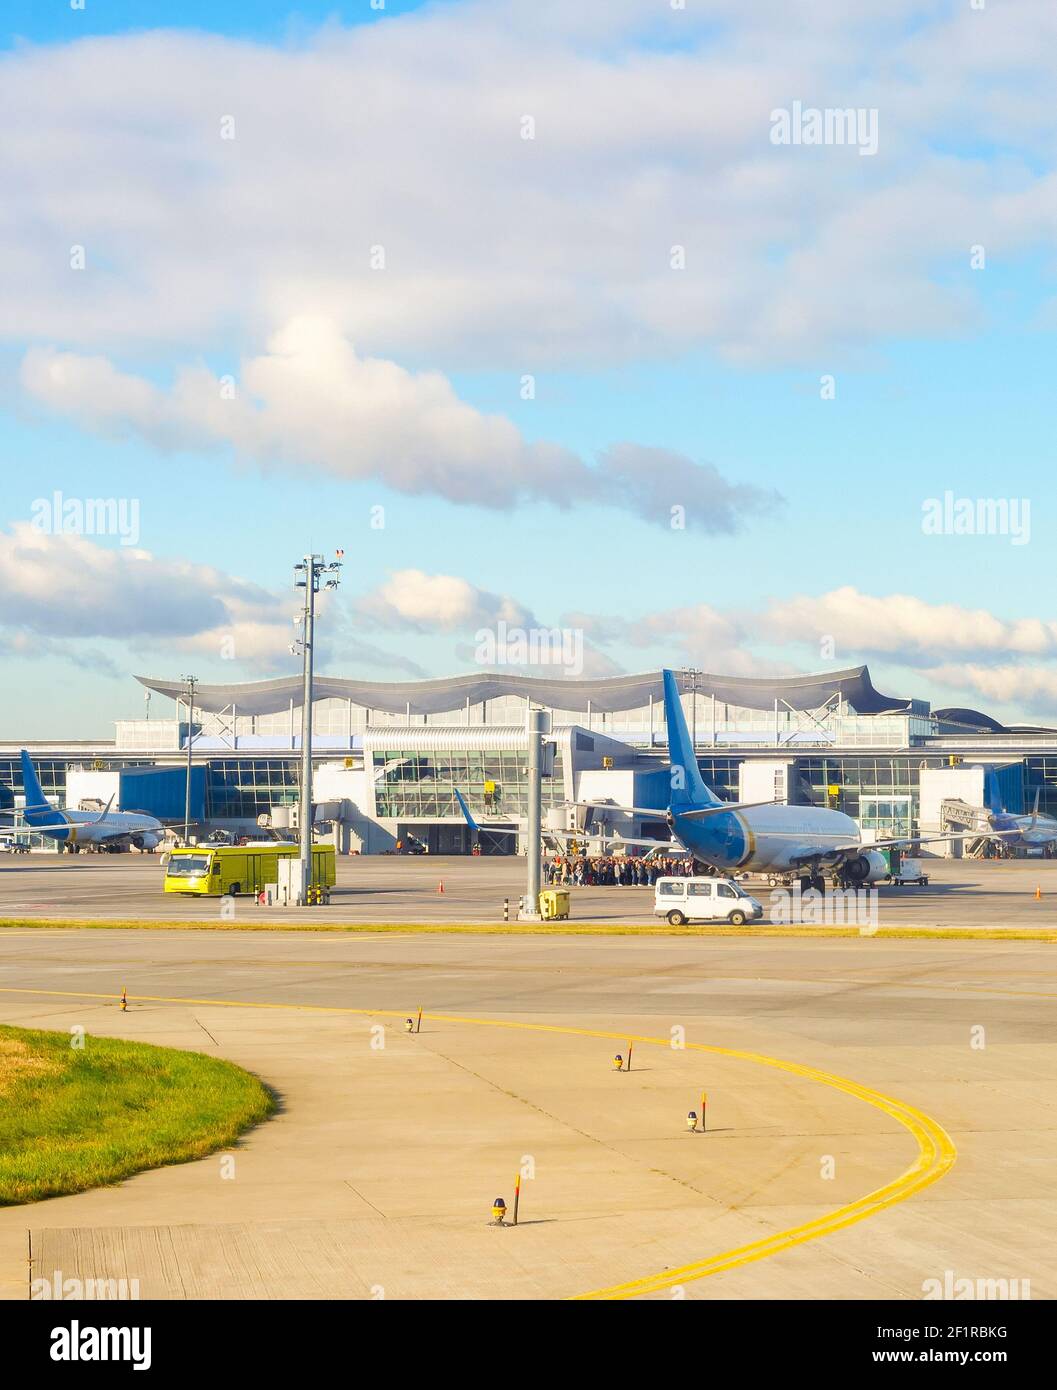 Boryspil airport, airplanes, bus, airfield Stock Photo